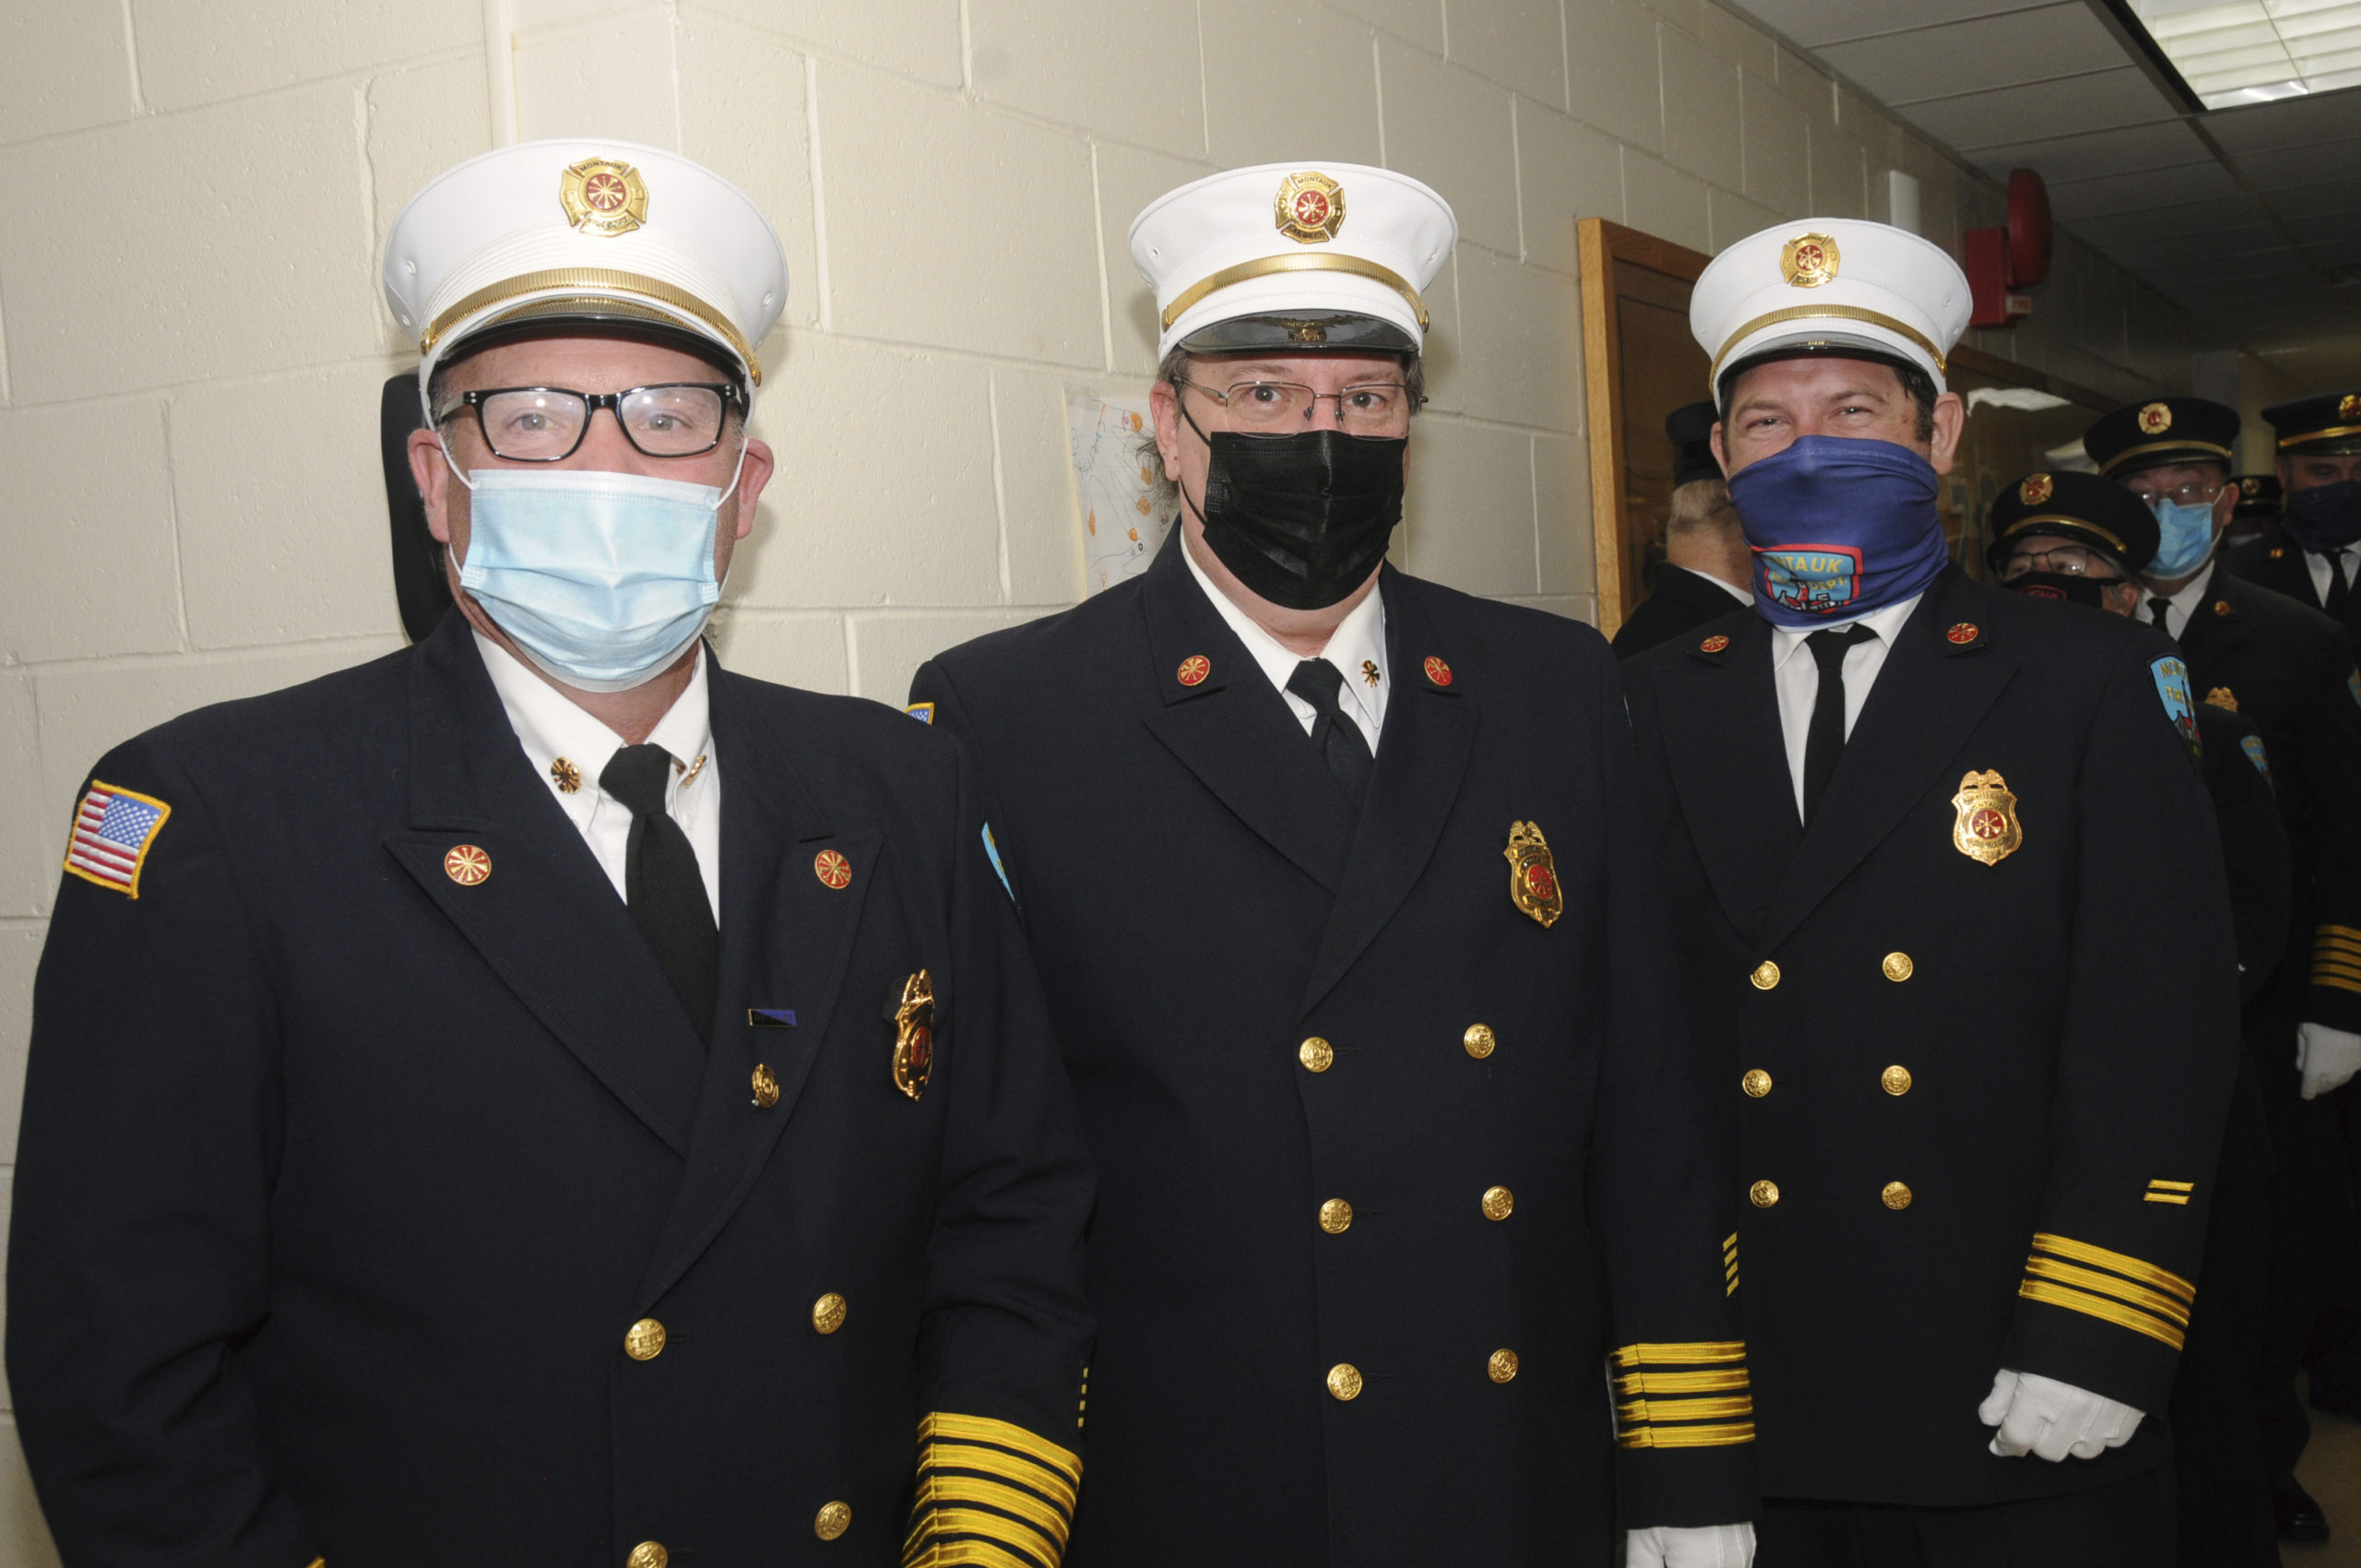 Every January 1, the Installation of Officers of the Montauk Fire Department is held at the Firehouse, making it official for the new year. Taking oaths for 2022 were, left to right, Chief Scott Snow, First Assistant Chief Kenneth Glogg and Second Assistant Chief Peter Joyce, Jr.    RICHARD LEWIN